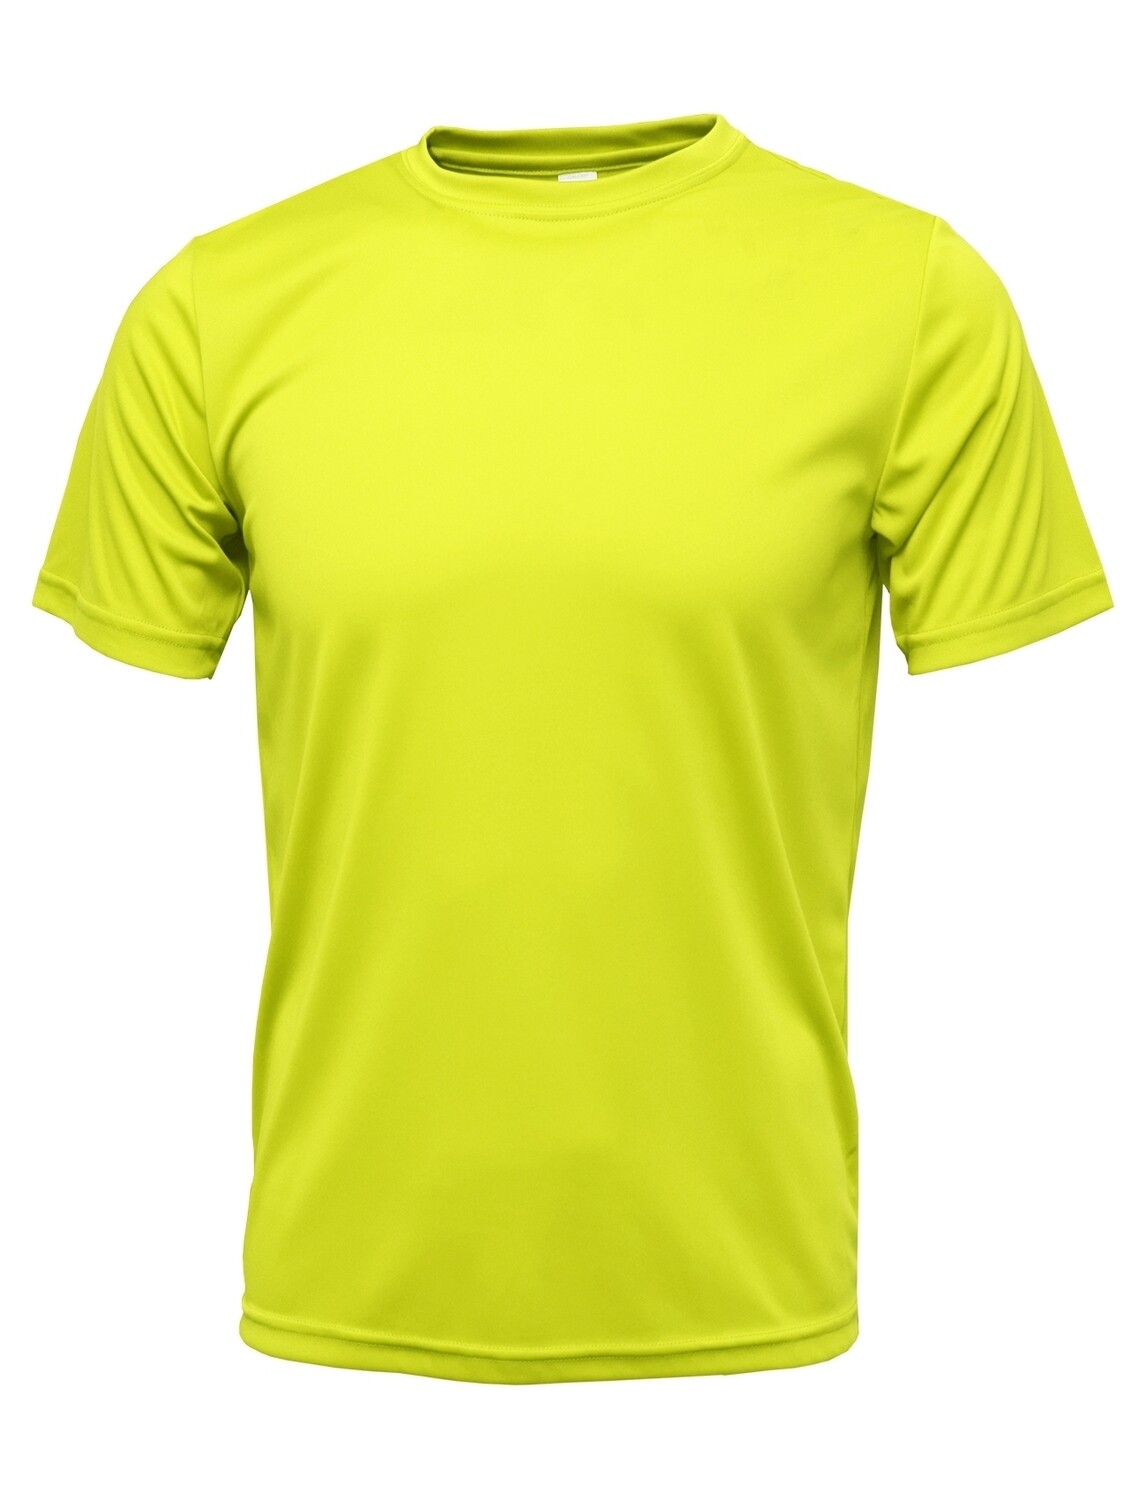 Safety Yellow SS / Front Print Only $9.85